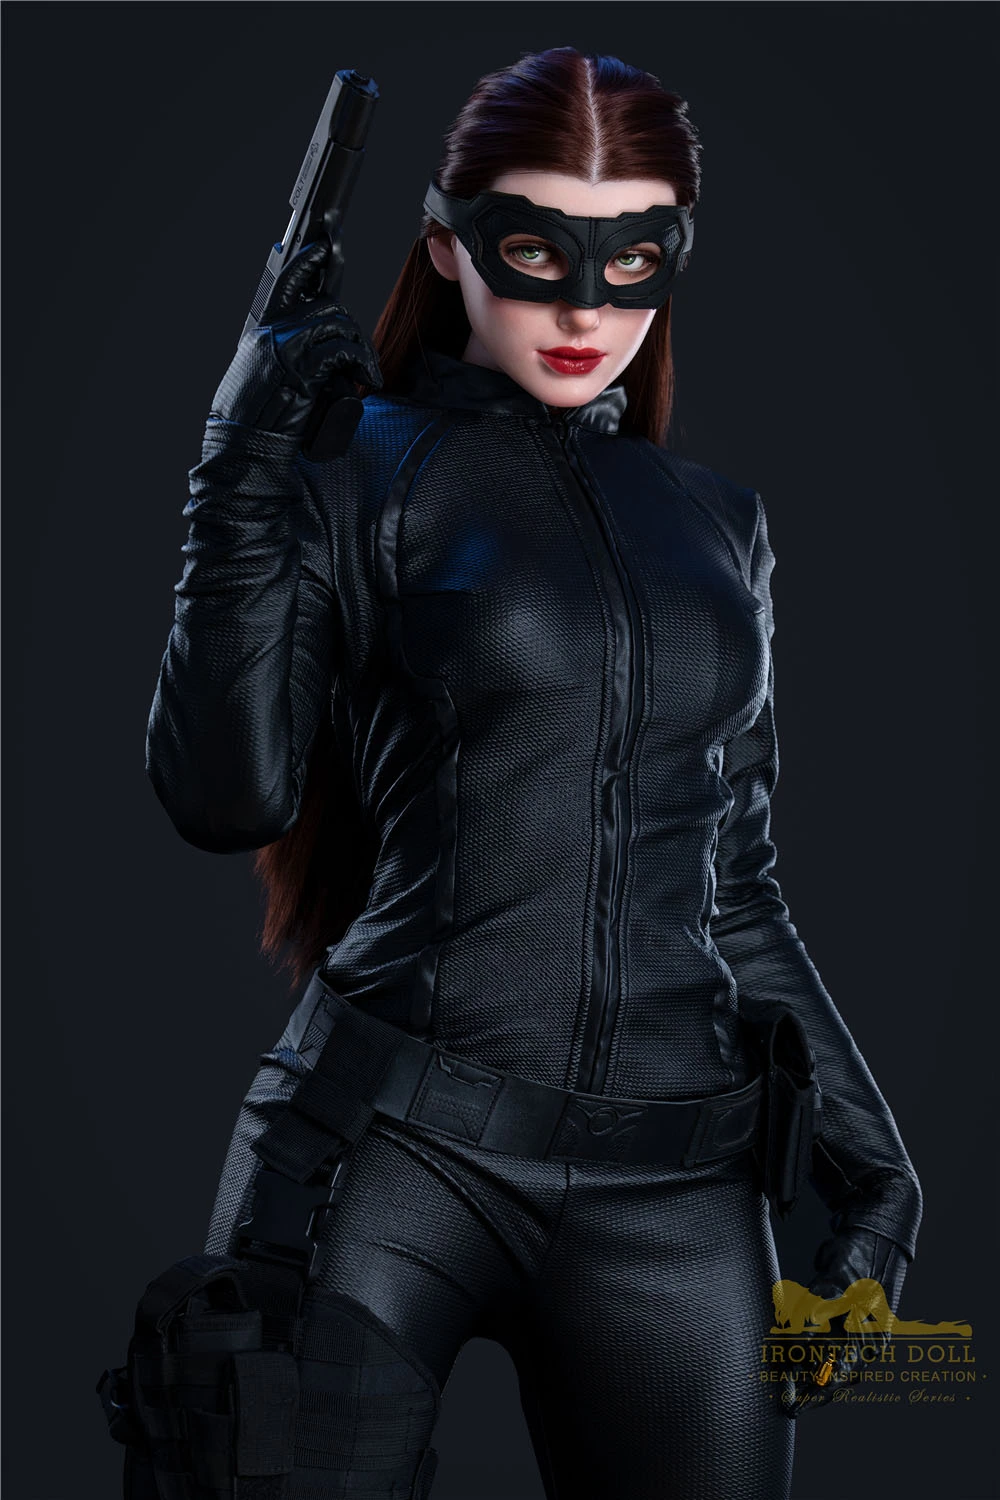 Irontech Doll Catwoman Cospaly